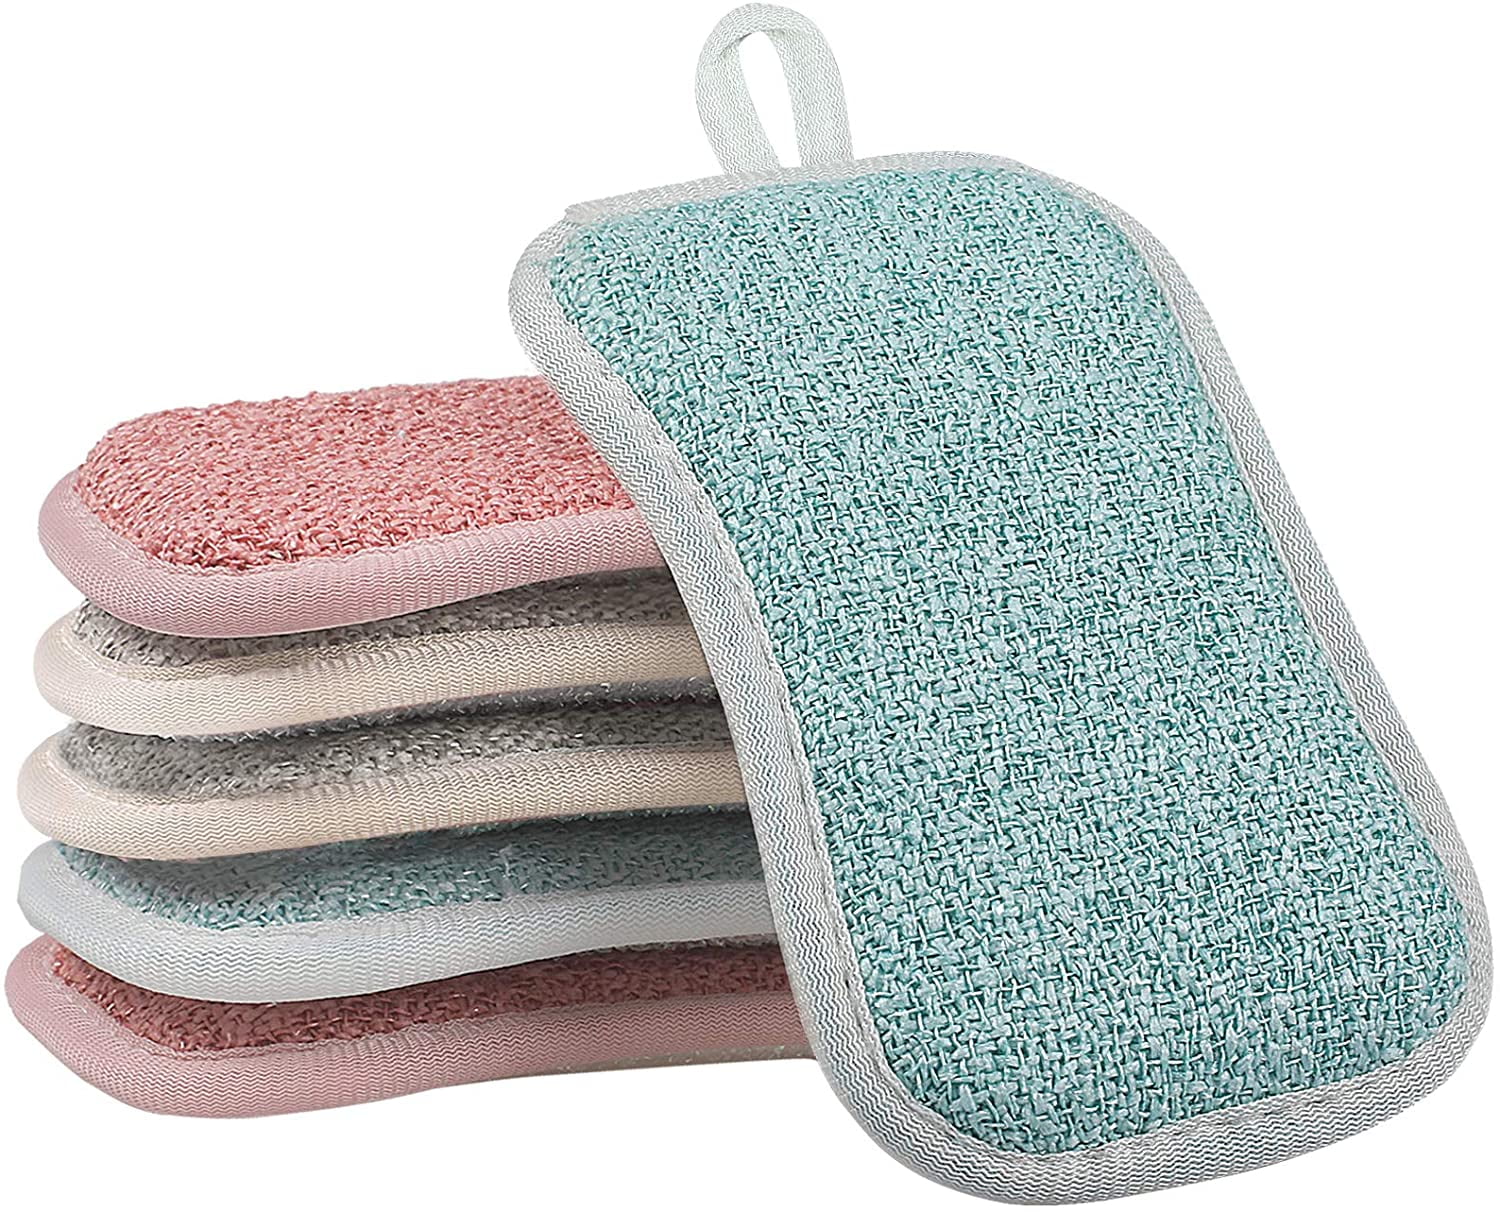 Cheap High Density Sponge Kitchen Cleaning Tools Washing Towels Wiping Rags  Sponge Scouring Pad Microfiber Dish Cleaning Cloth 3 Types